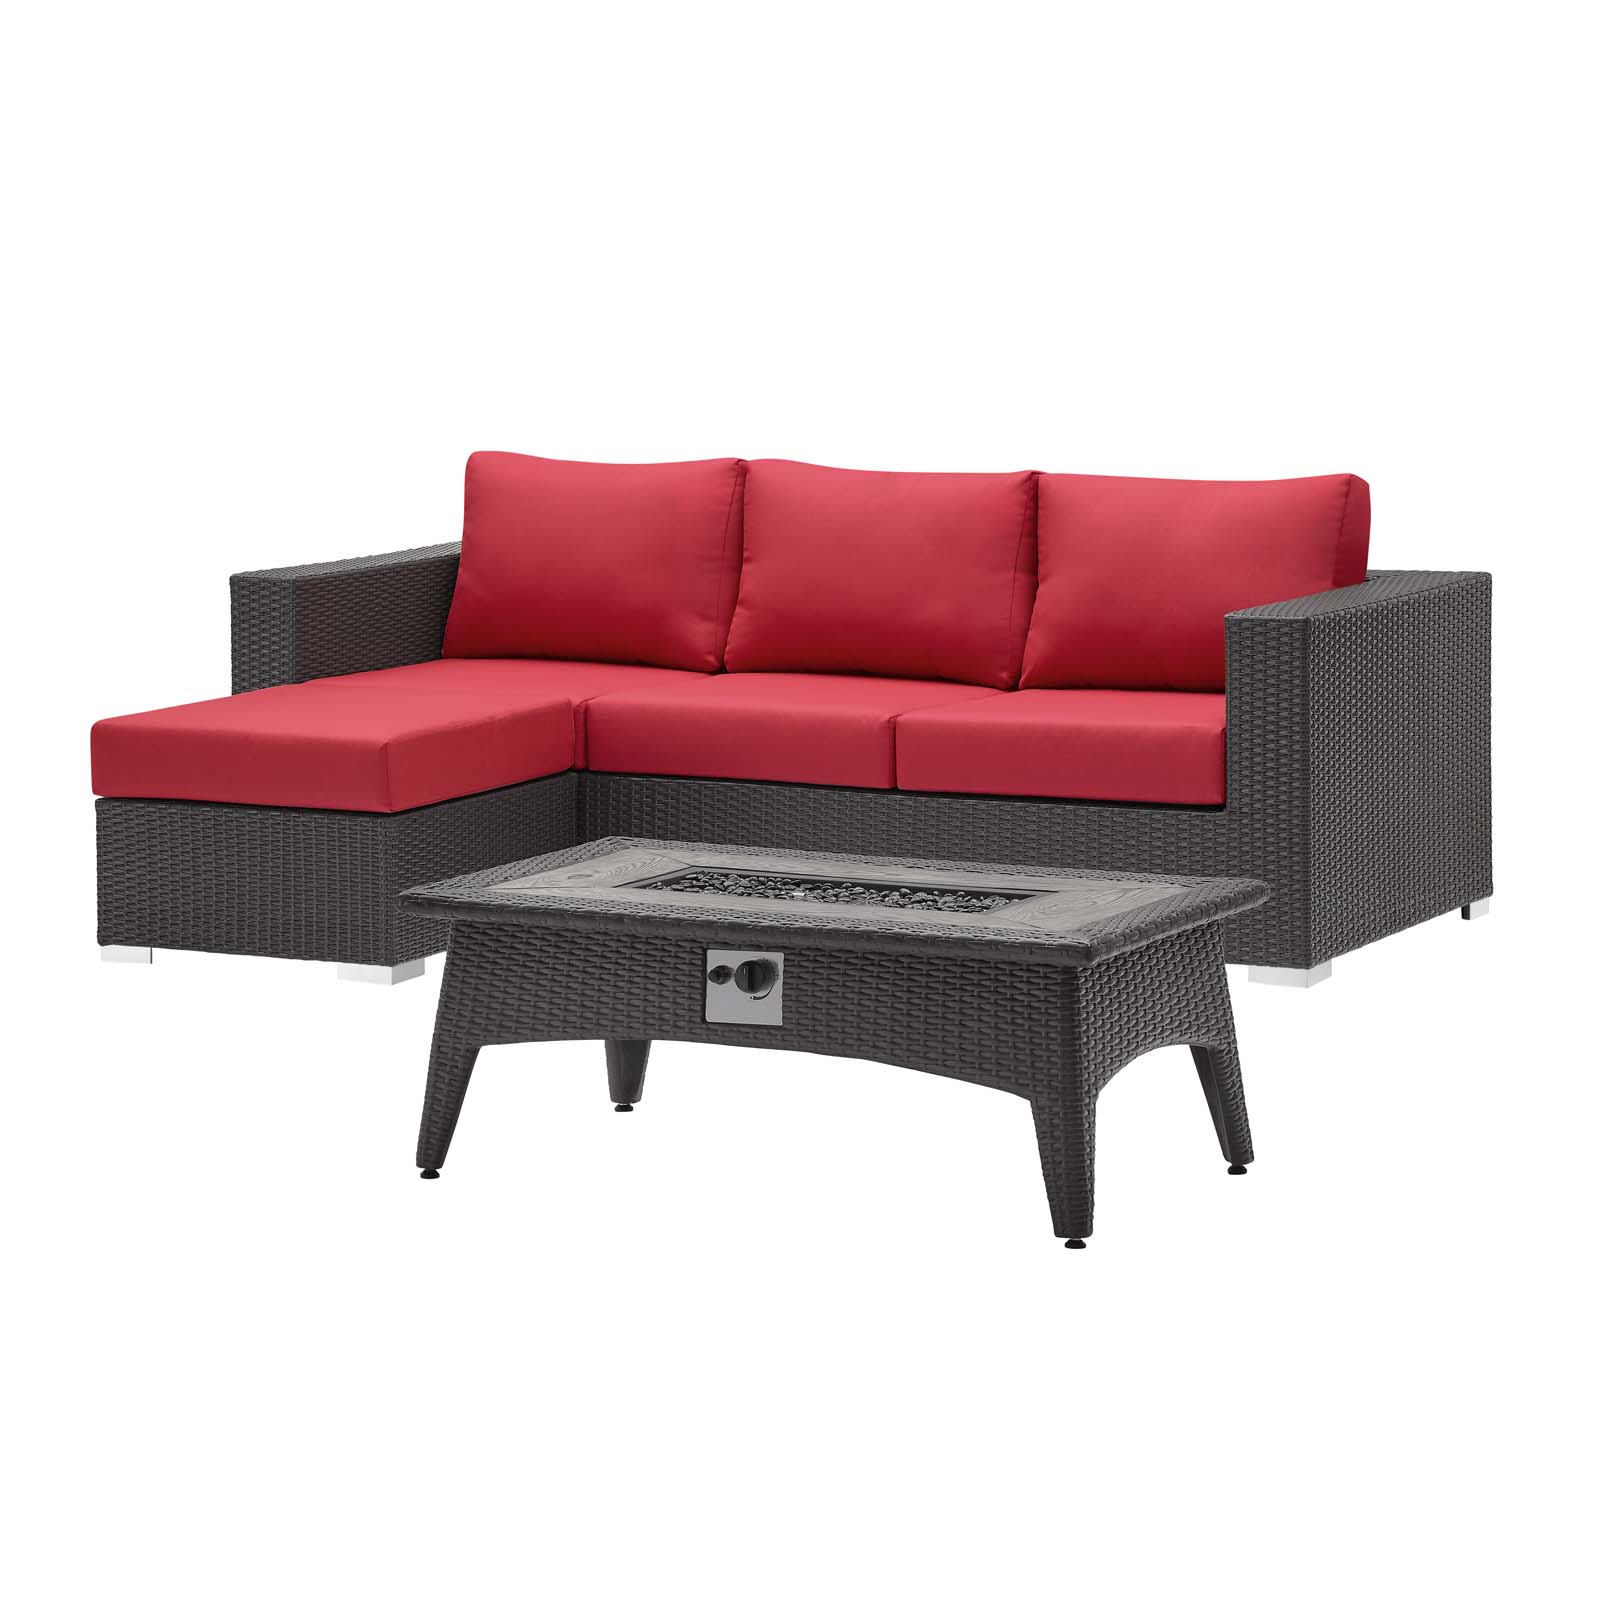 Contemporary Modern Urban Designer Outdoor Patio Balcony Garden Furniture Lounge Sofa, Chair and Coffee Table Fire Pit Set, Fabric Rattan Wicker, Red - image 2 of 8